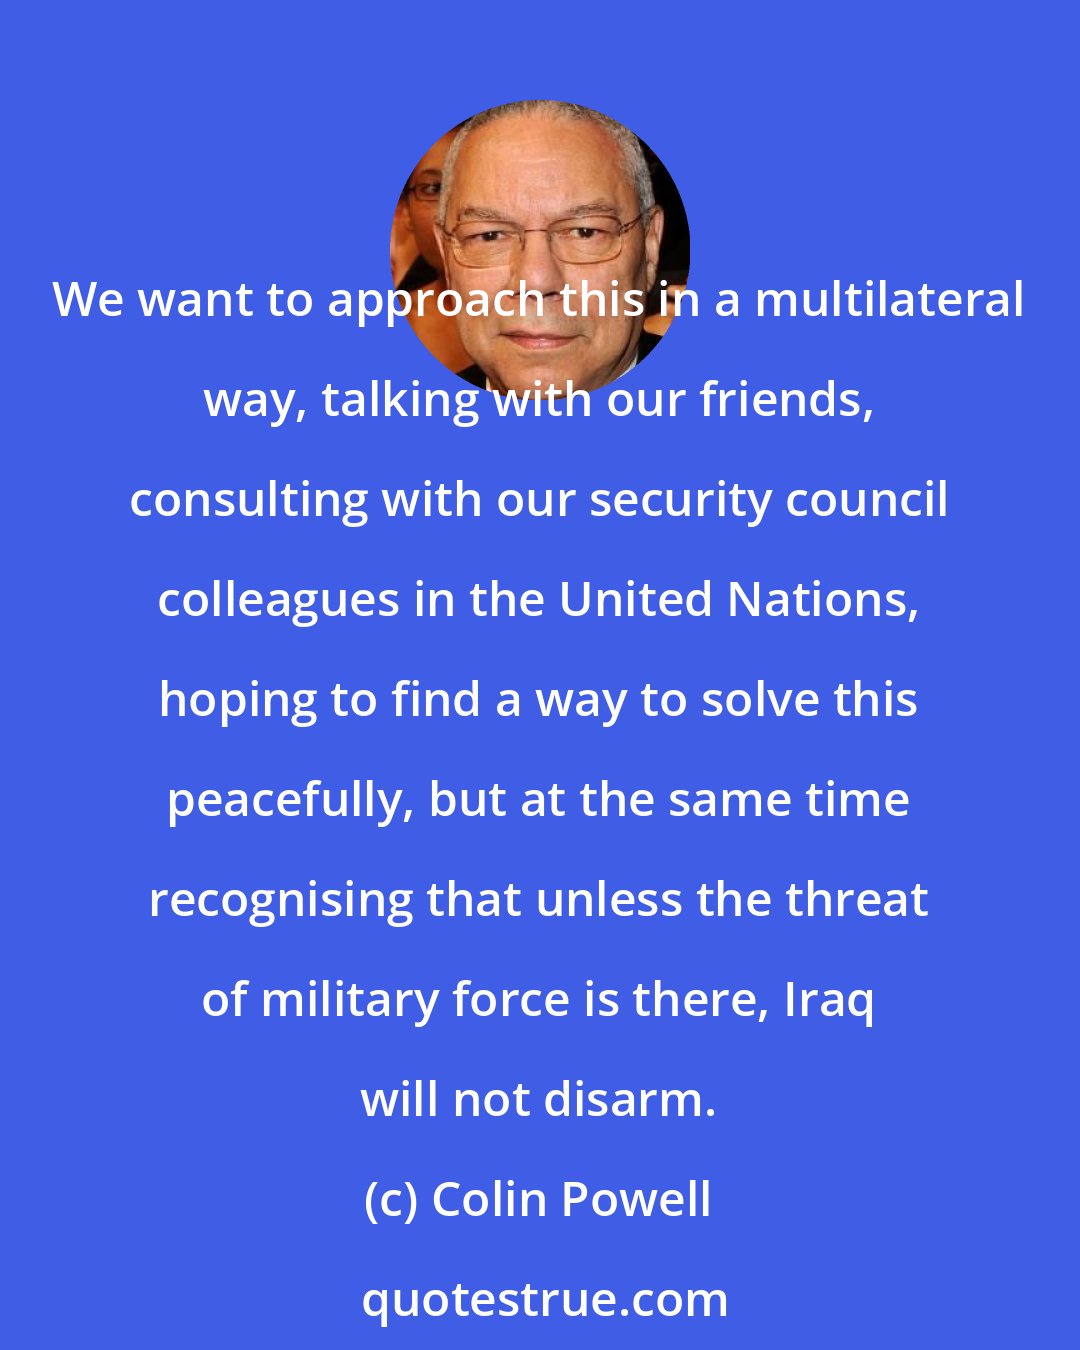 Colin Powell: We want to approach this in a multilateral way, talking with our friends, consulting with our security council colleagues in the United Nations, hoping to find a way to solve this peacefully, but at the same time recognising that unless the threat of military force is there, Iraq will not disarm.